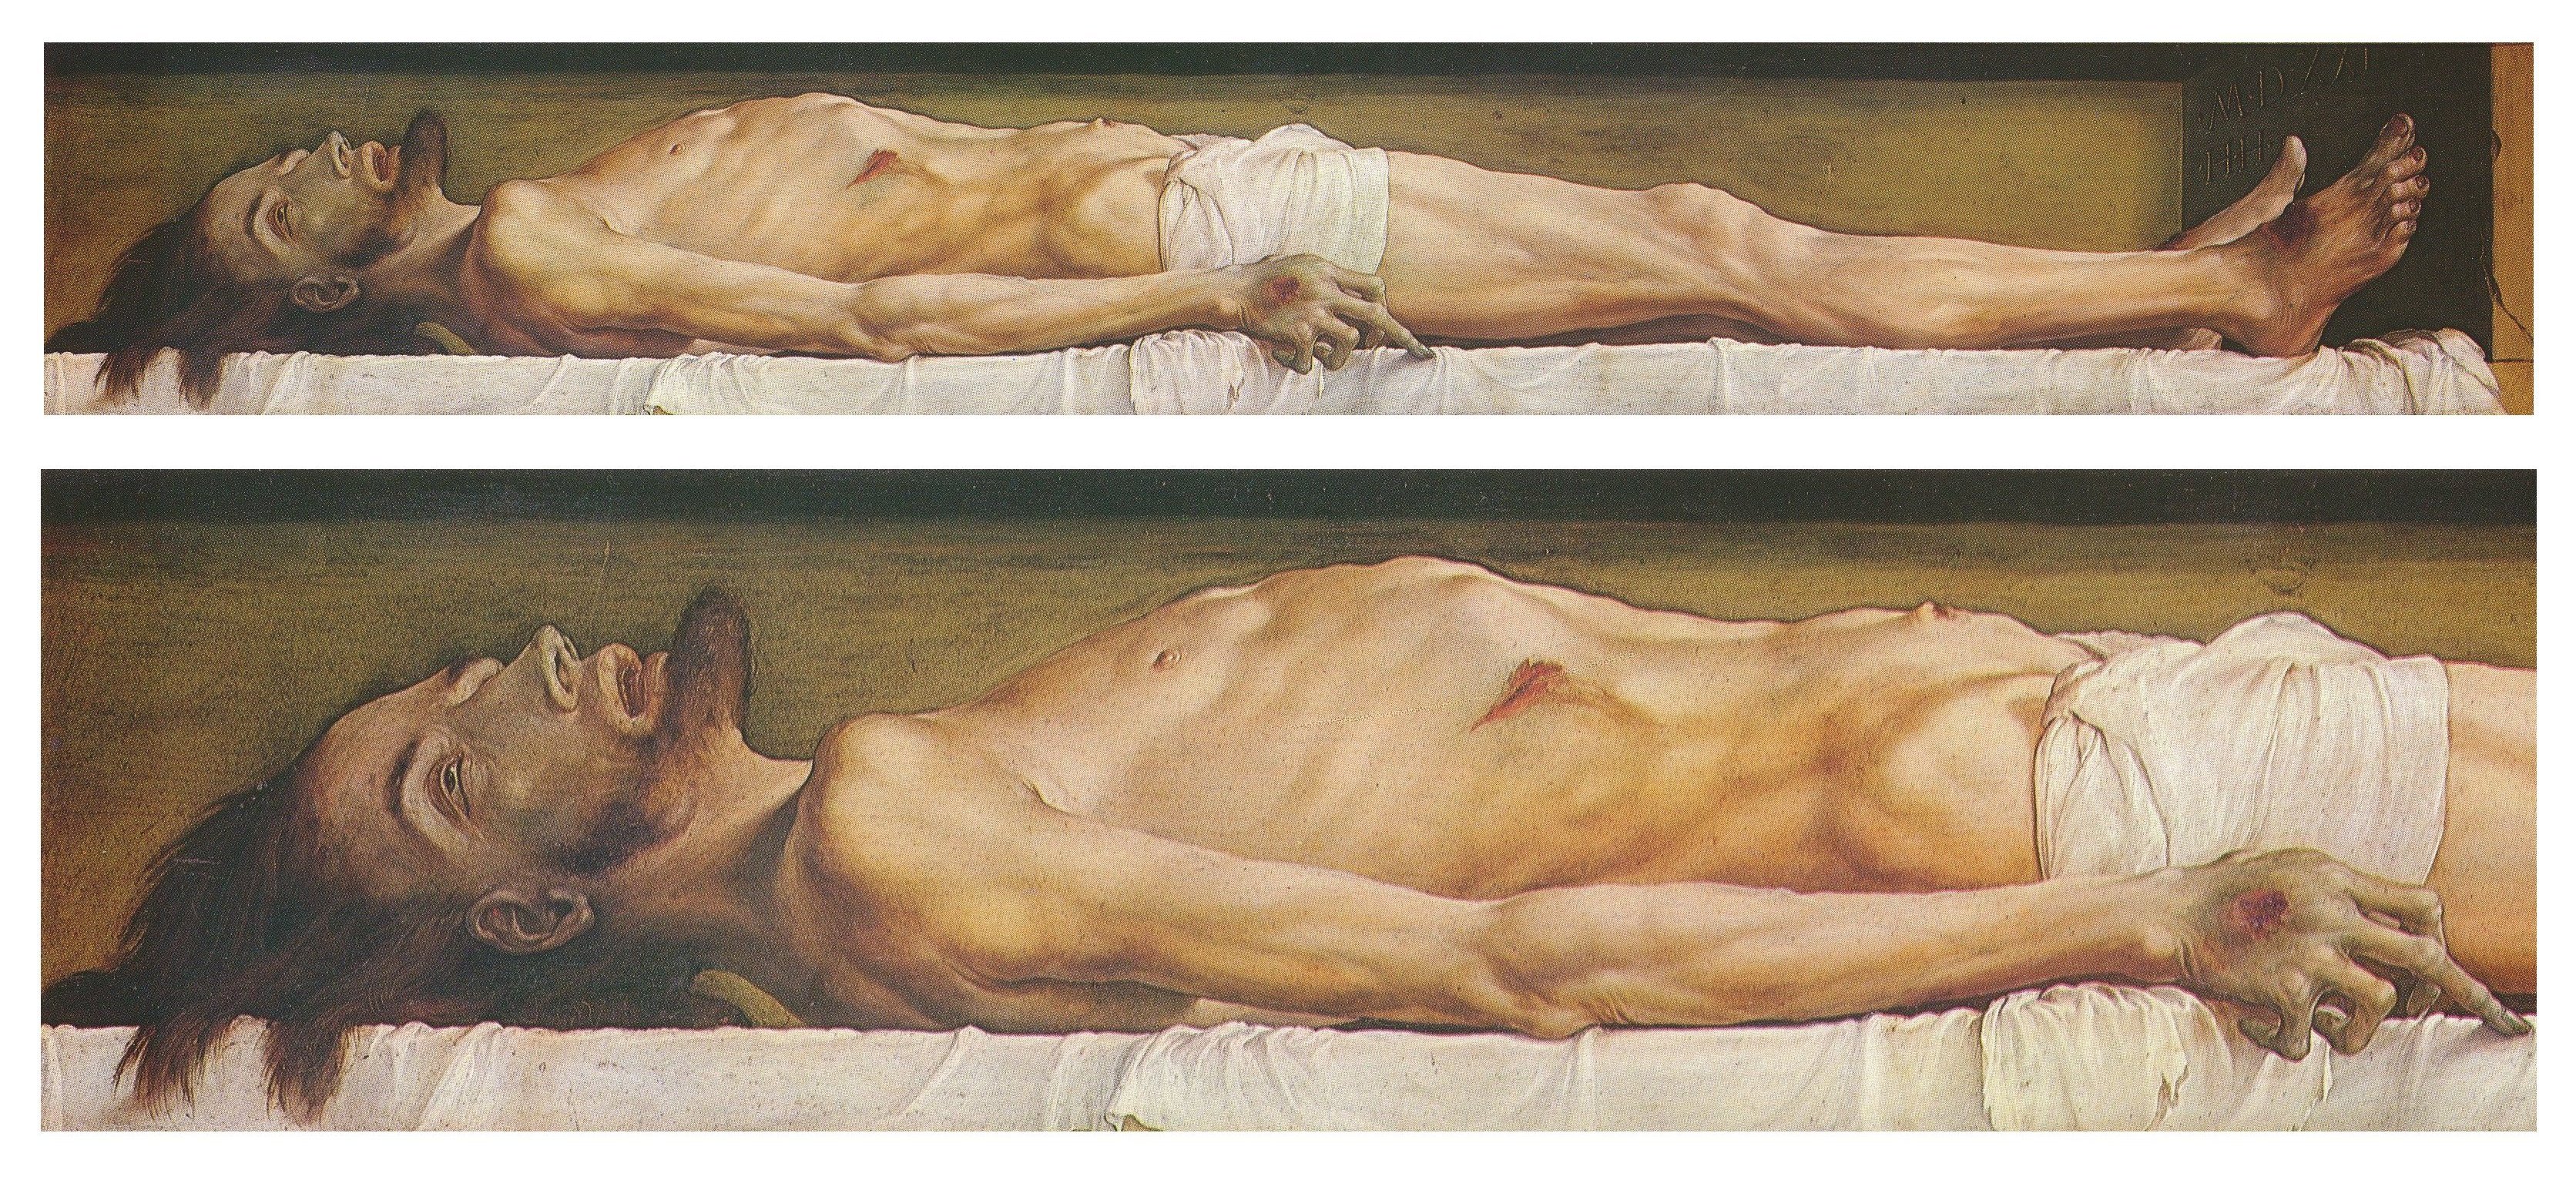 The Body of the Dead Christ in the Tomb, and a Detail, by Hans Holbein the Younger